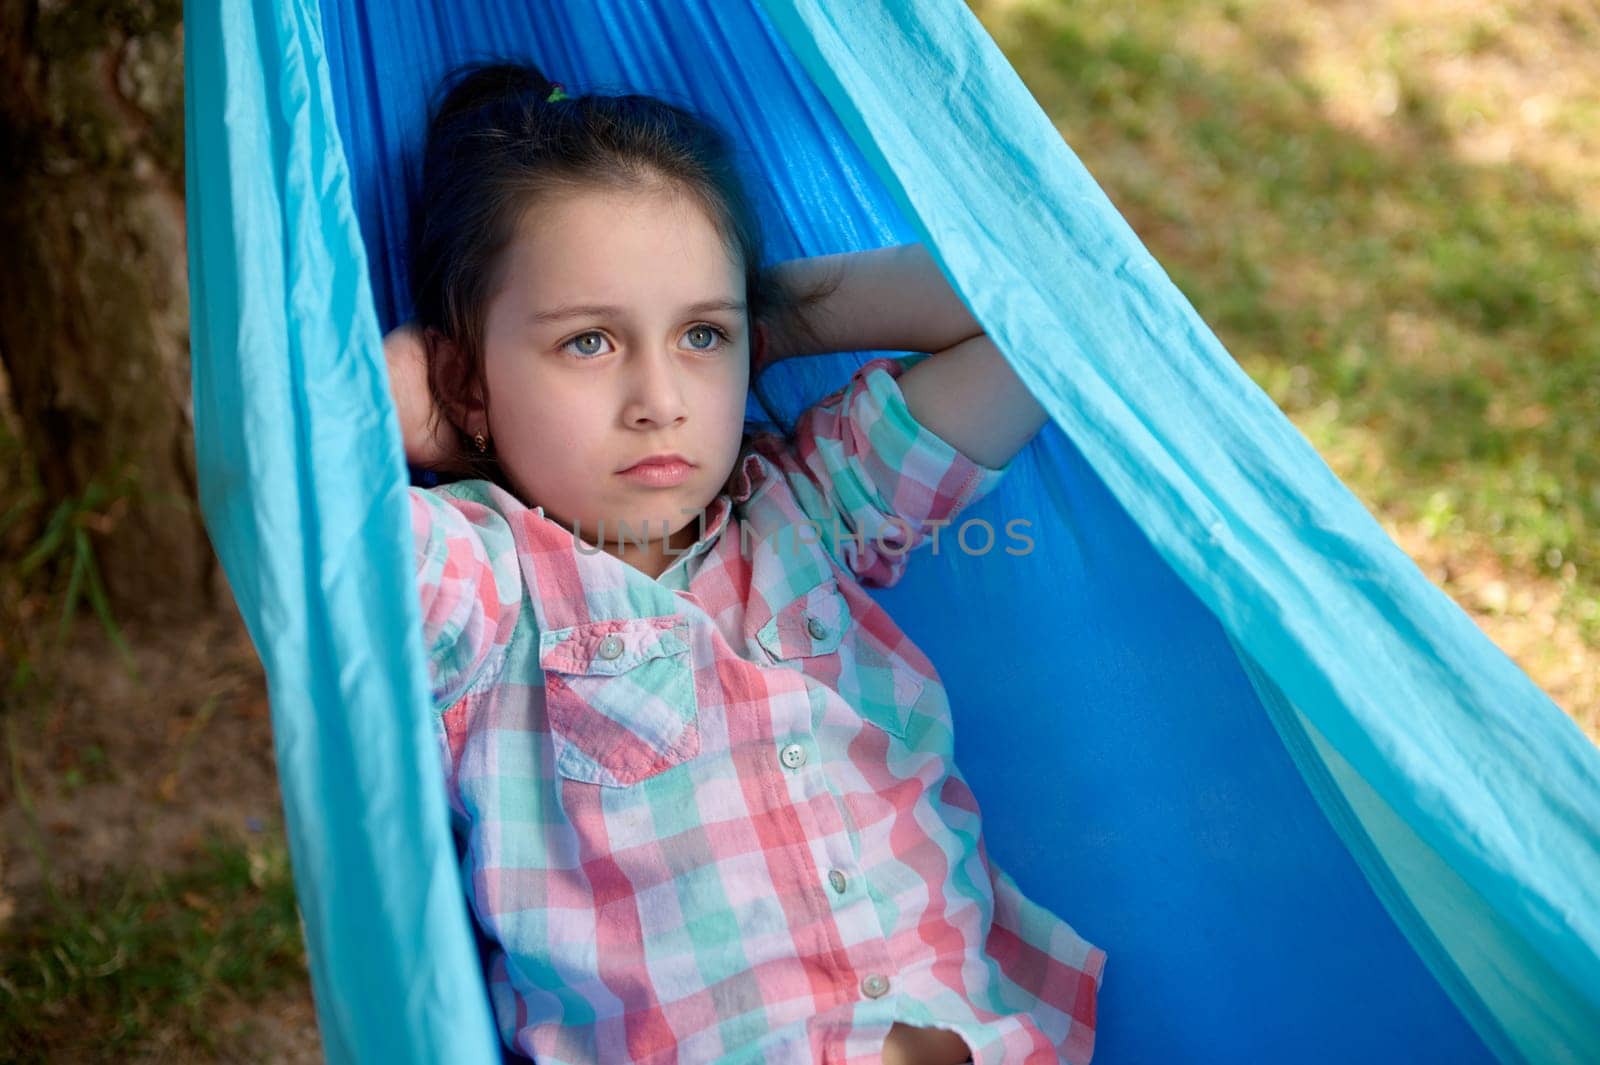 Close-up portrait of lovely little child girl dressed in casual denim and pink checkered shirt, relaxing, lying on a blue hammock in the backyard or summer camp, enjoying her weekend outdoors